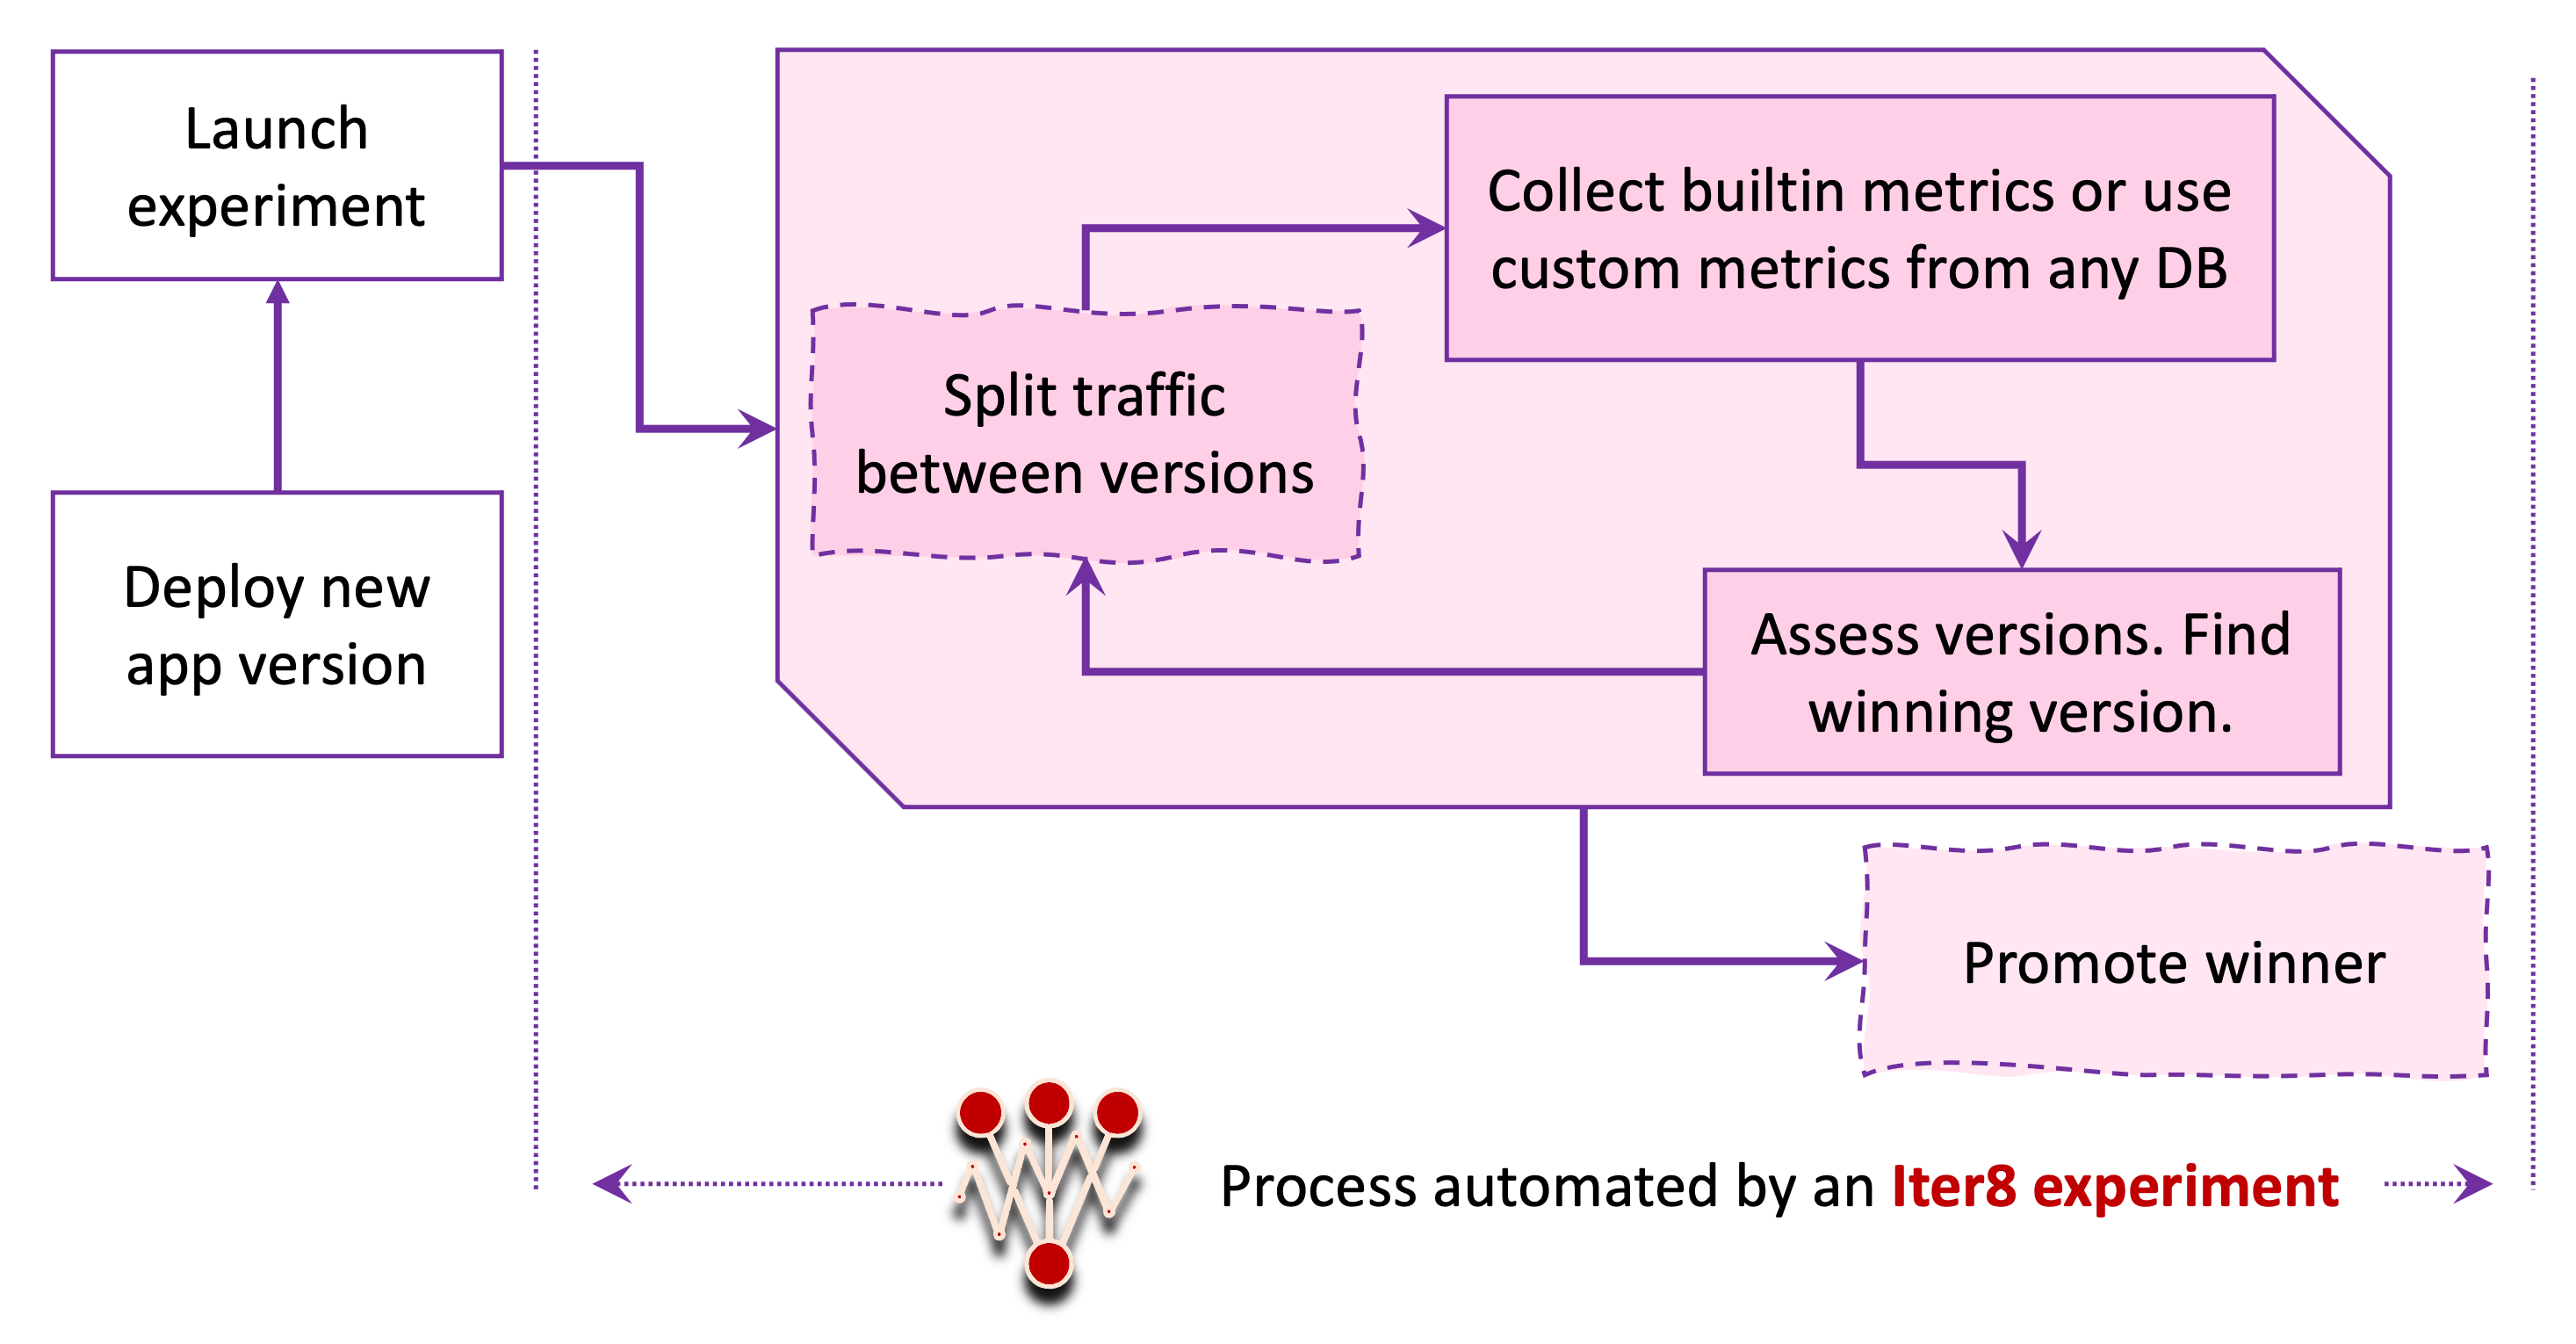 Process automated by an Iter8 experiment